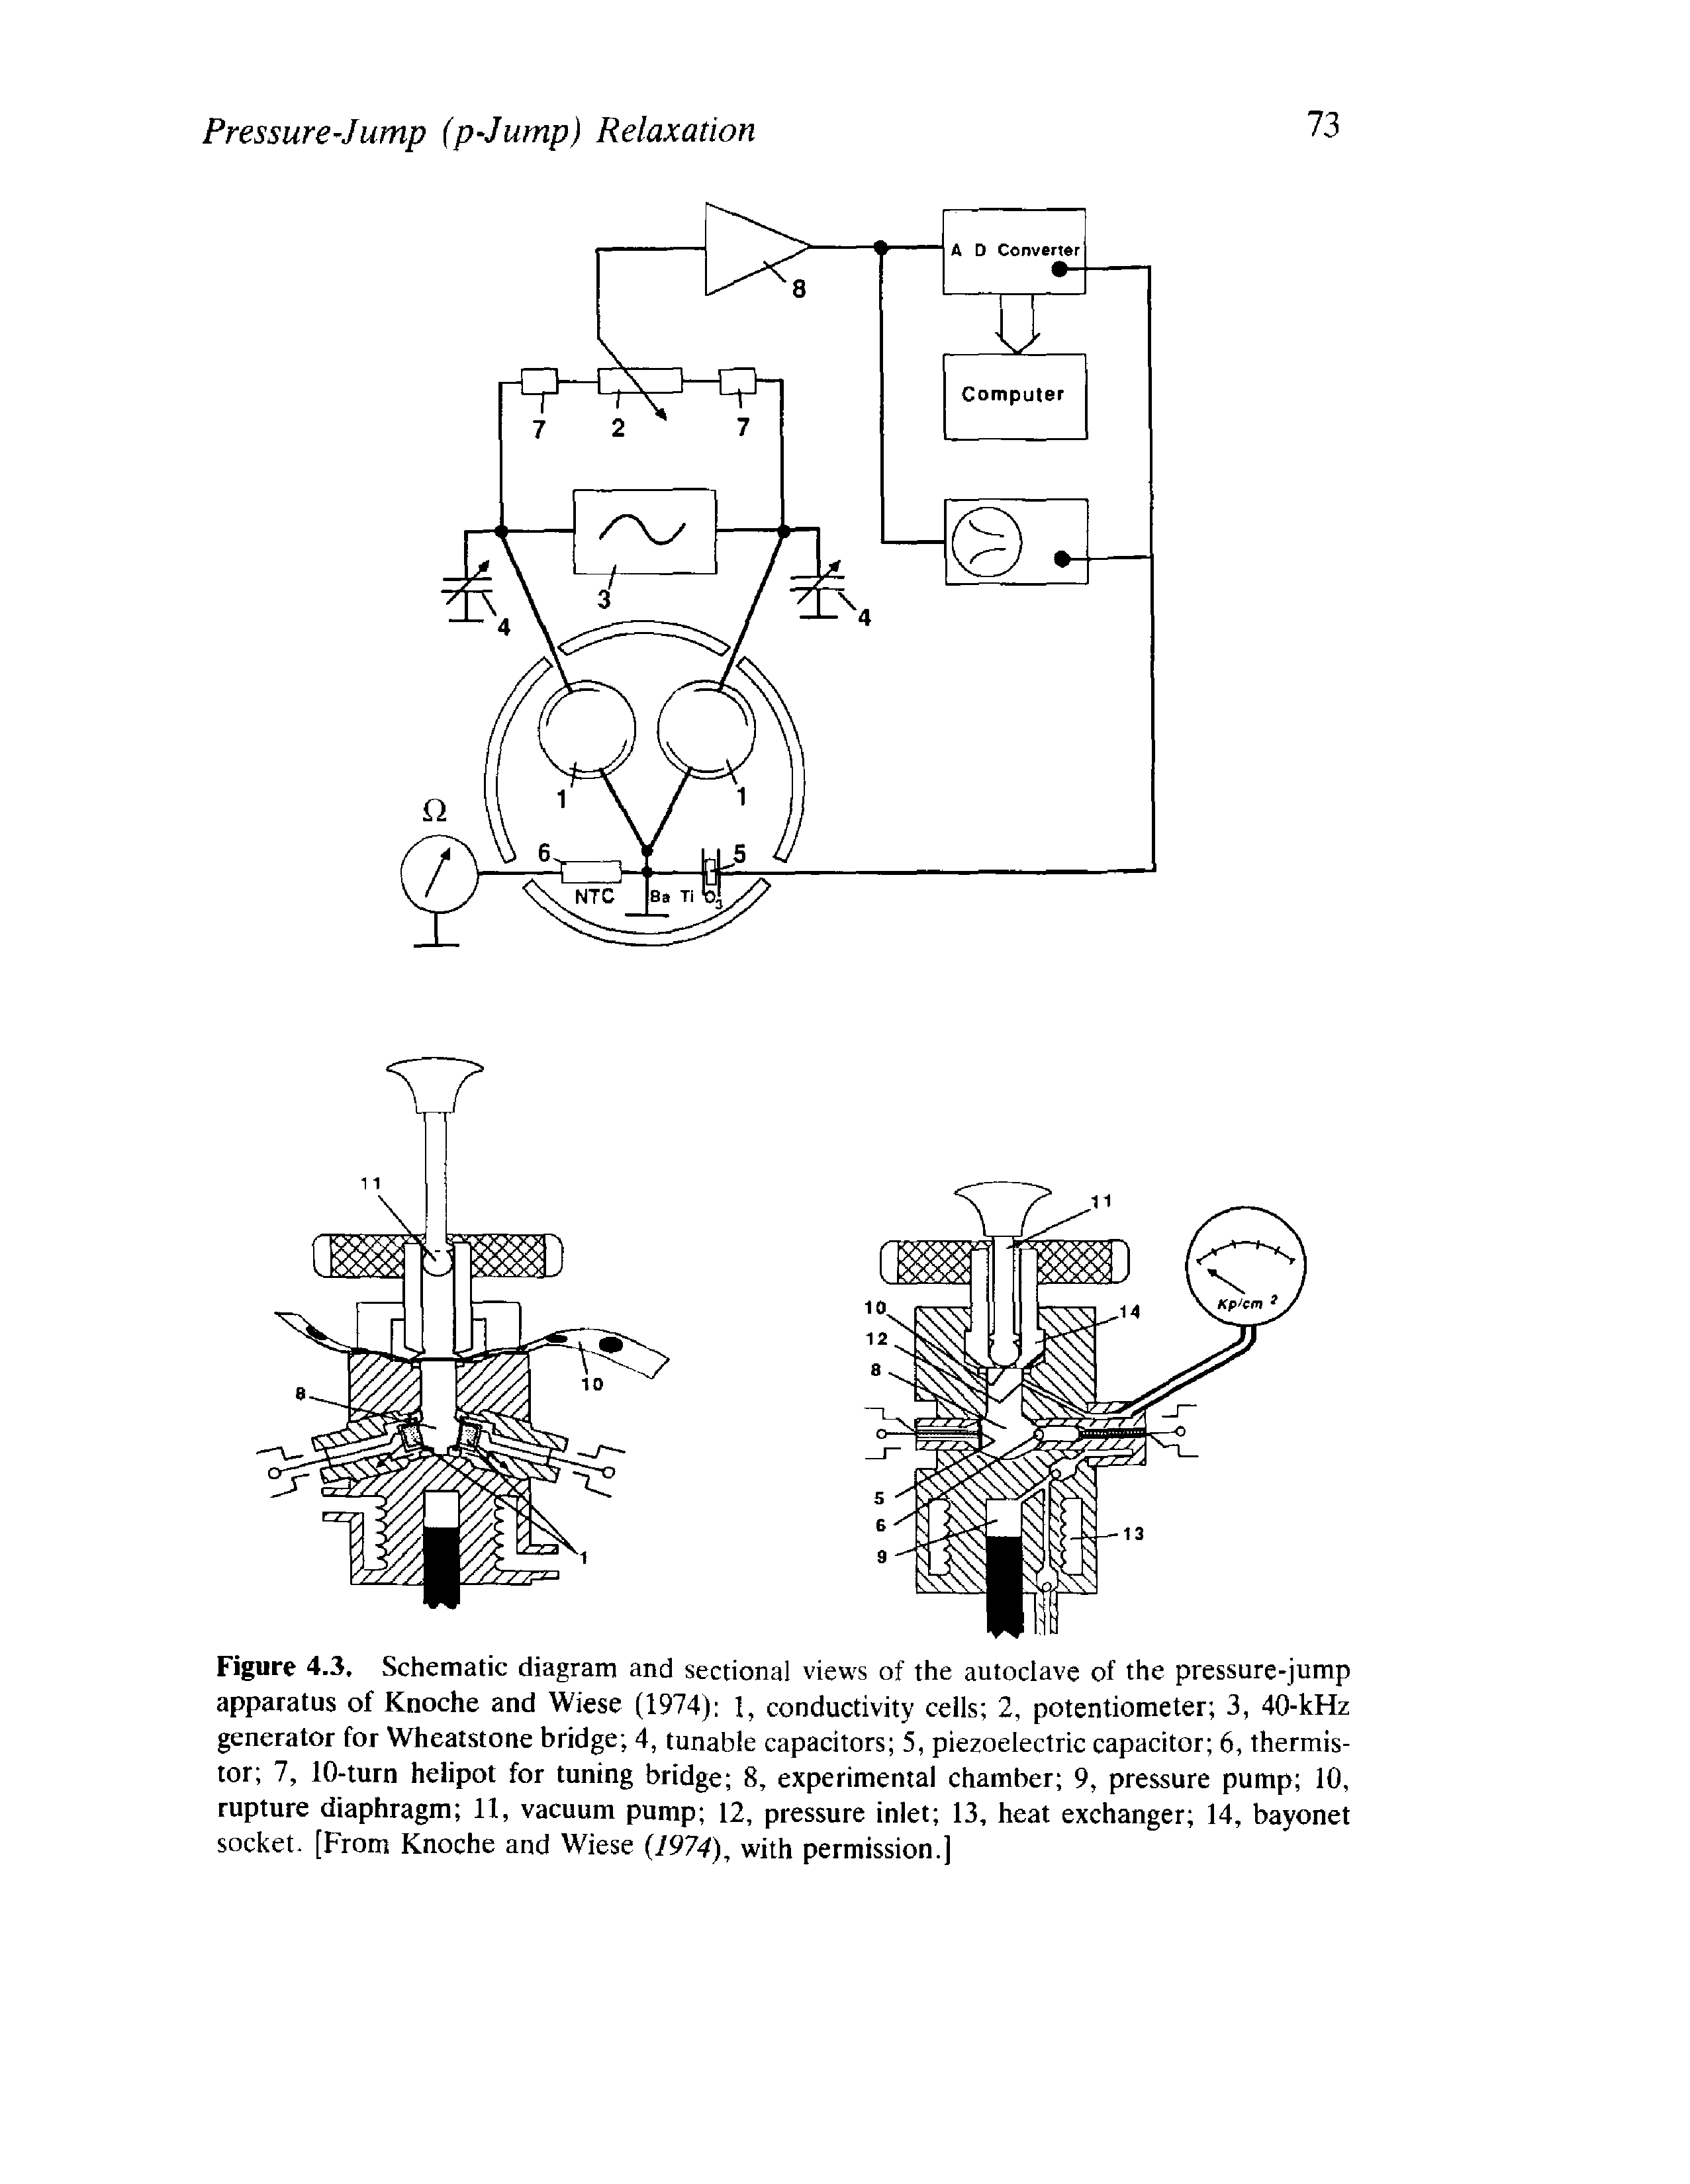 Figure 4.3. Schematic diagram and sectional views of the autoclave of the pressure-jump apparatus of Knoche and Wiese (1974) 1, conductivity cells 2, potentiometer 3, 40-kHz generator for Wheatstone bridge 4, tunable capacitors 5, piezoelectric capacitor 6, thermistor 7, 10-turn helipot for tuning bridge 8, experimental chamber 9, pressure pump 10, rupture diaphragm 11, vacuum pump 12, pressure inlet 13, heat exchanger 14, bayonet socket. [From Knoche and Wiese (1974), with permission.]...